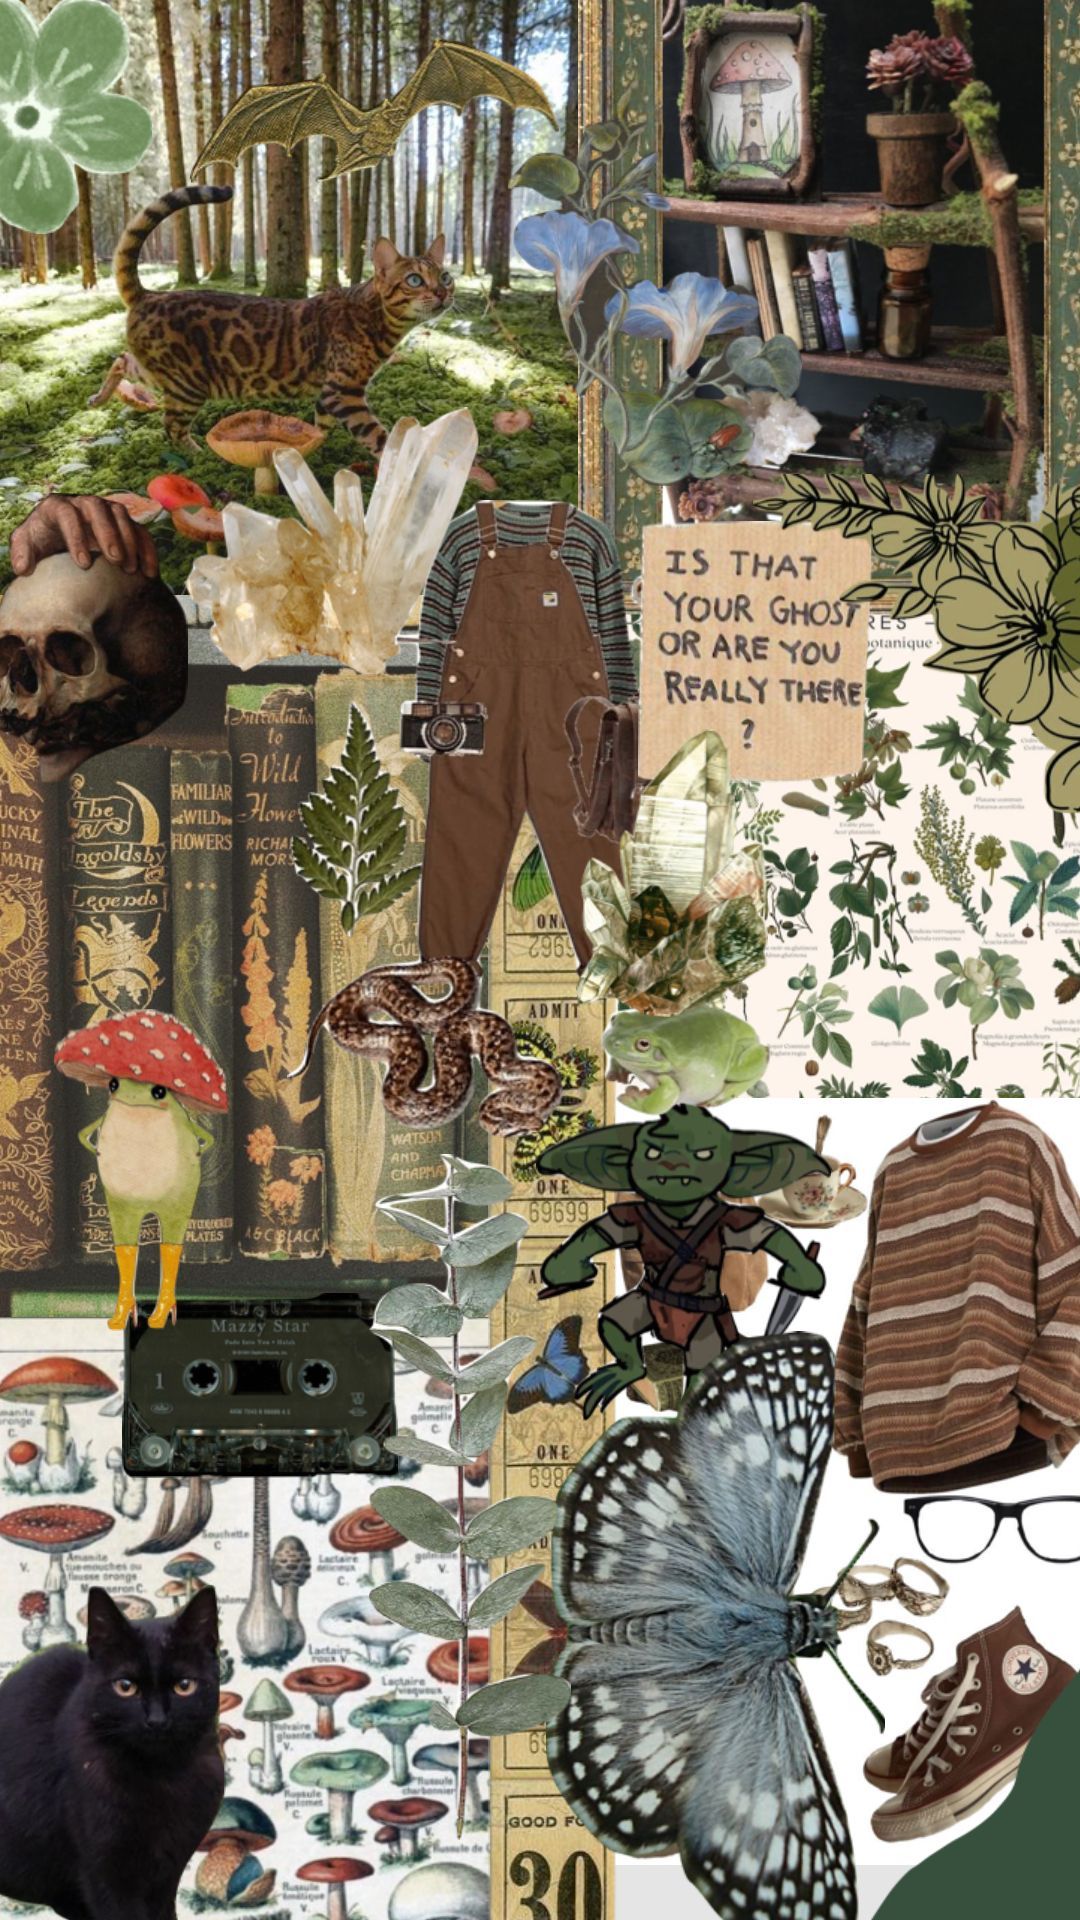 Aesthetic collage of nature, plants, mushrooms, butterfly, books, and a cat. - Goblincore